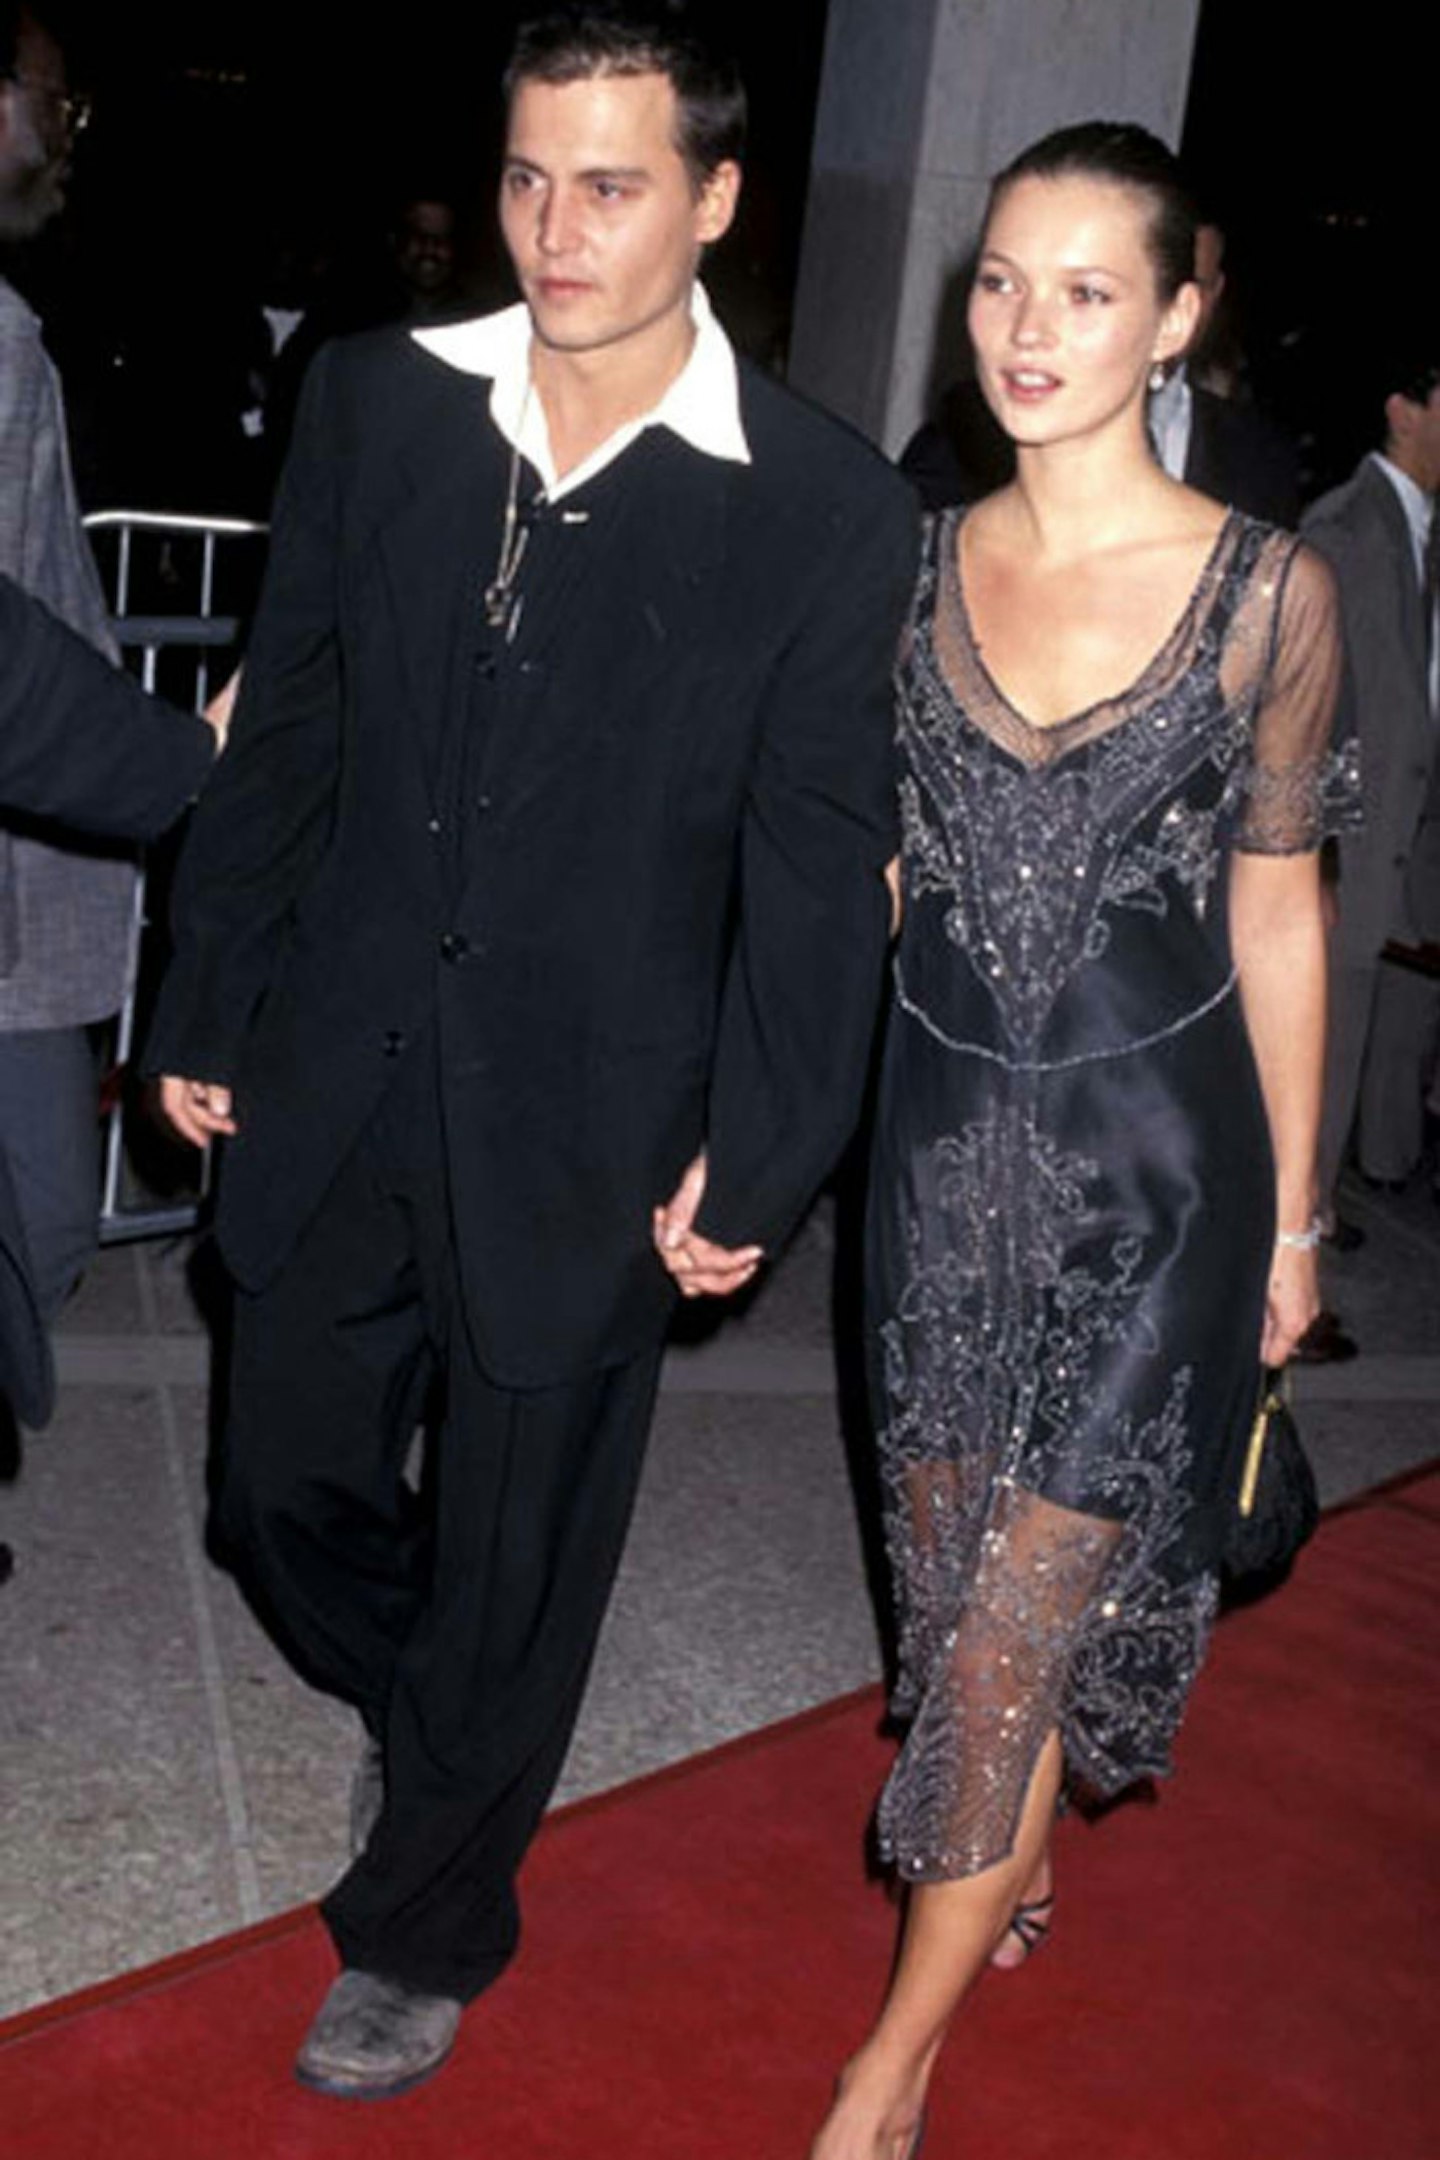 Kate Moss at the Premiere of Donnie Brasco, February 1997